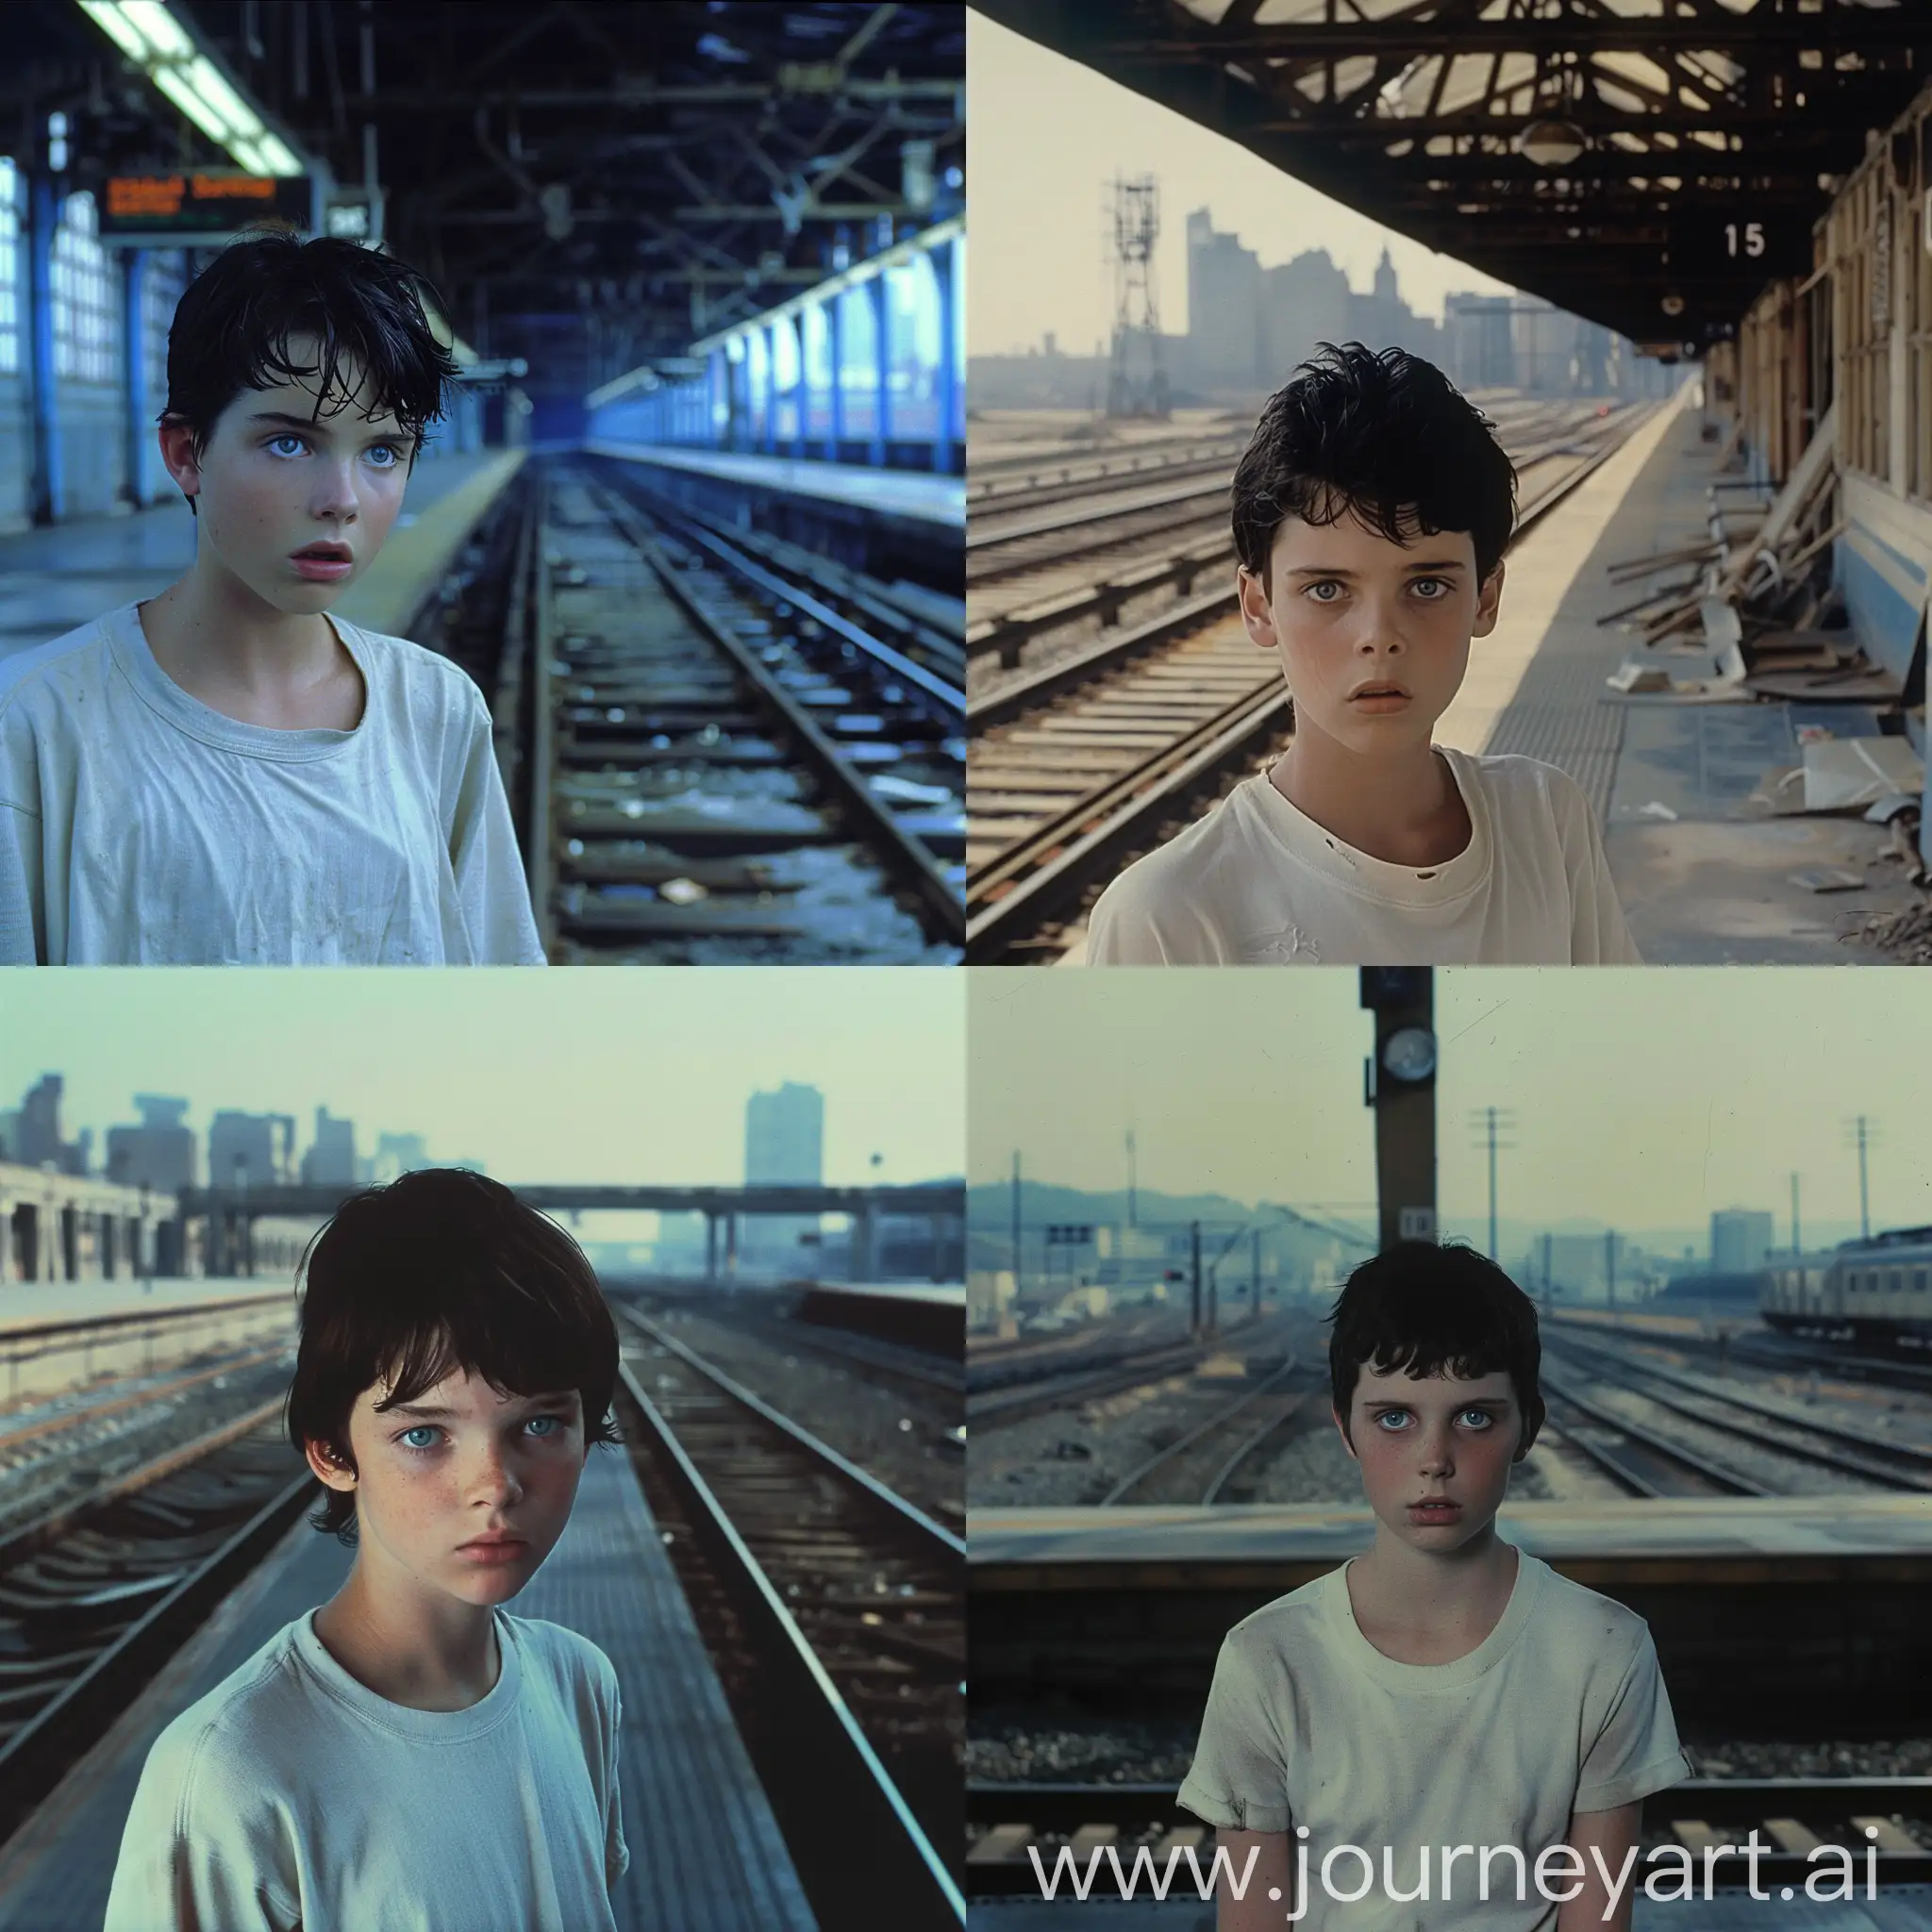 Lonely-Teenager-at-Abandoned-City-Train-Station-Cinematic-1980s-Scene